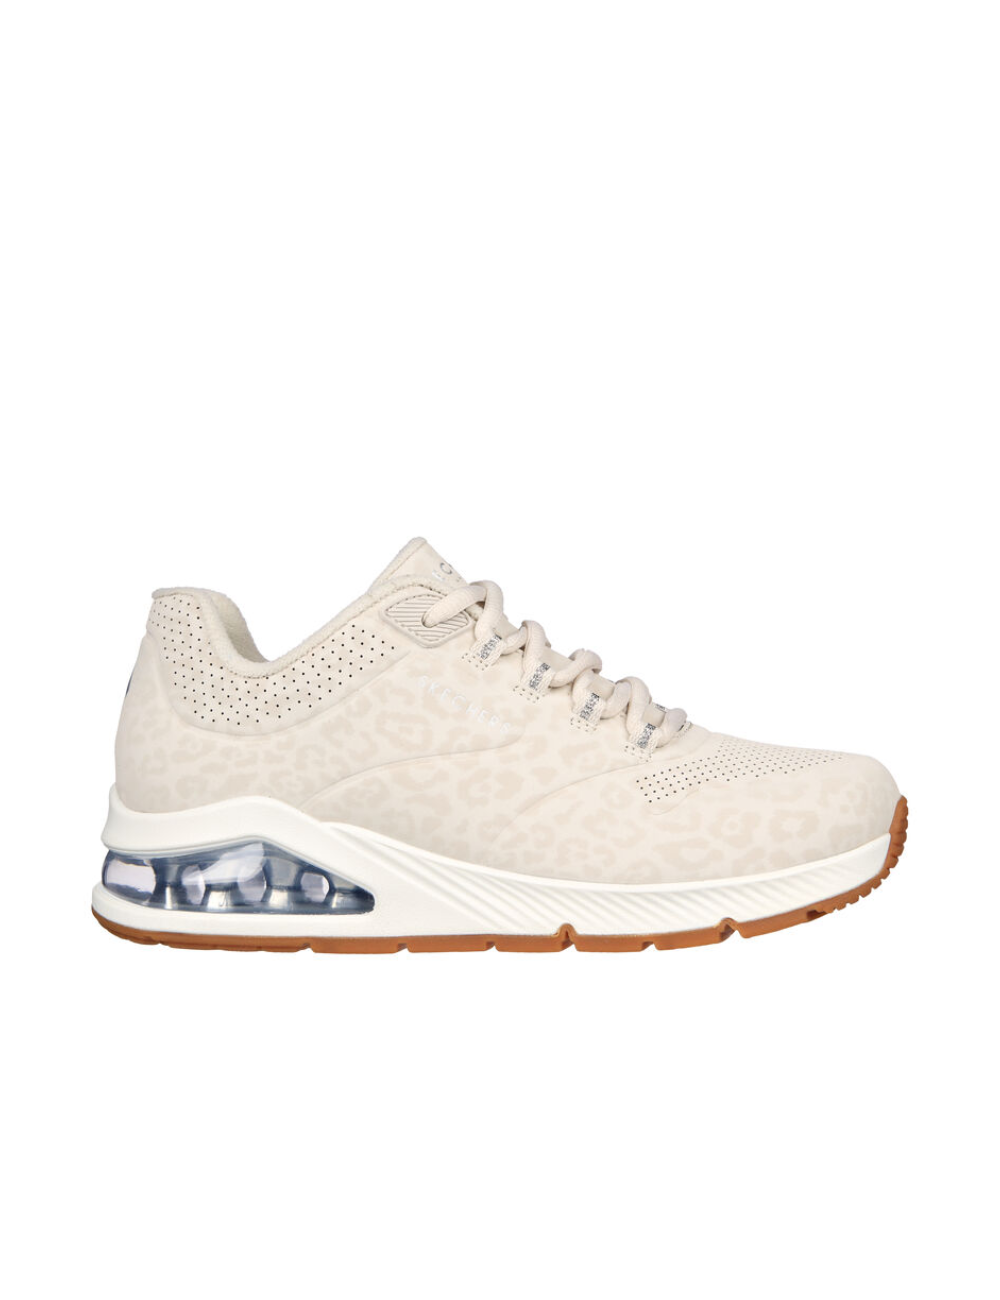 SKECHERS taupe 117175-tpe zapatillas para mujer